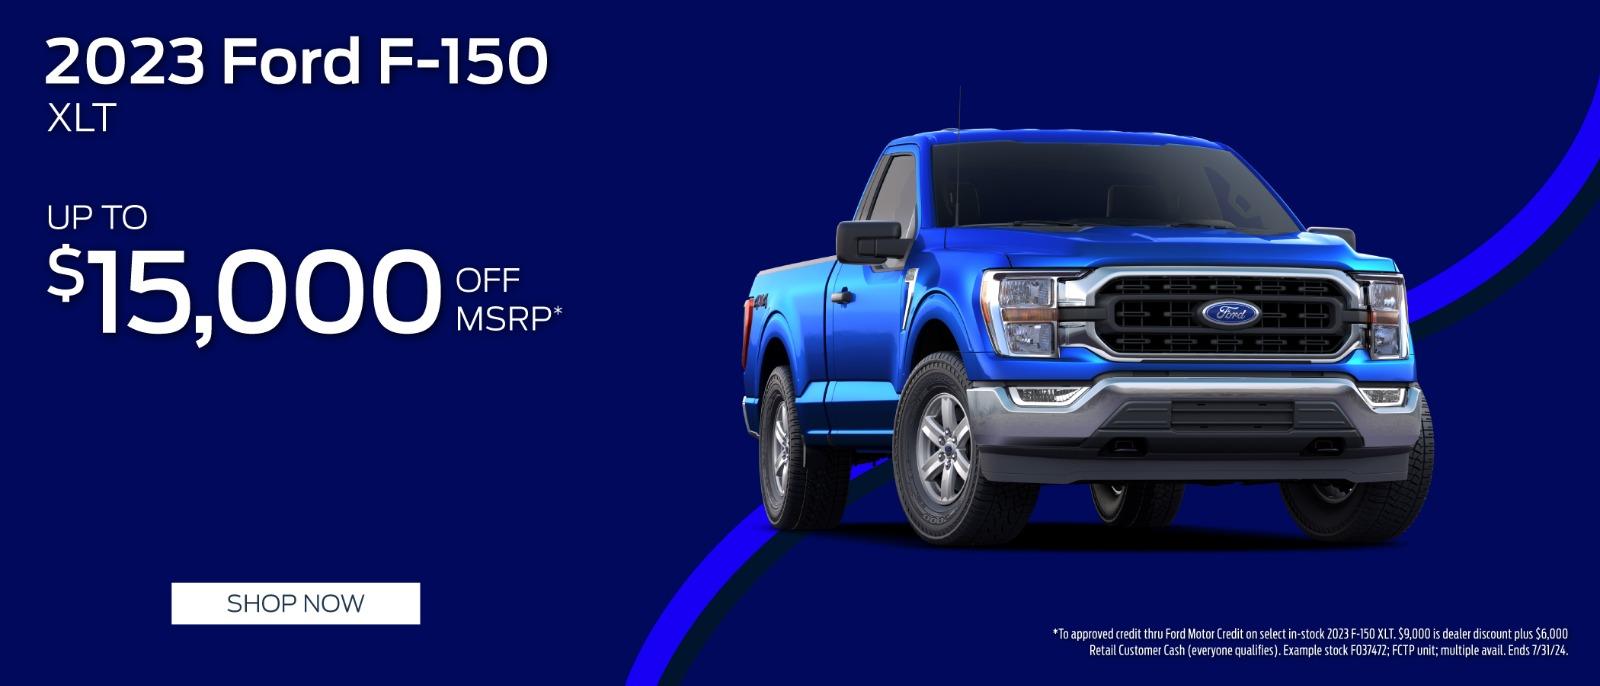 2023 Ford F-150 XLT up to $15,000 off MSRP